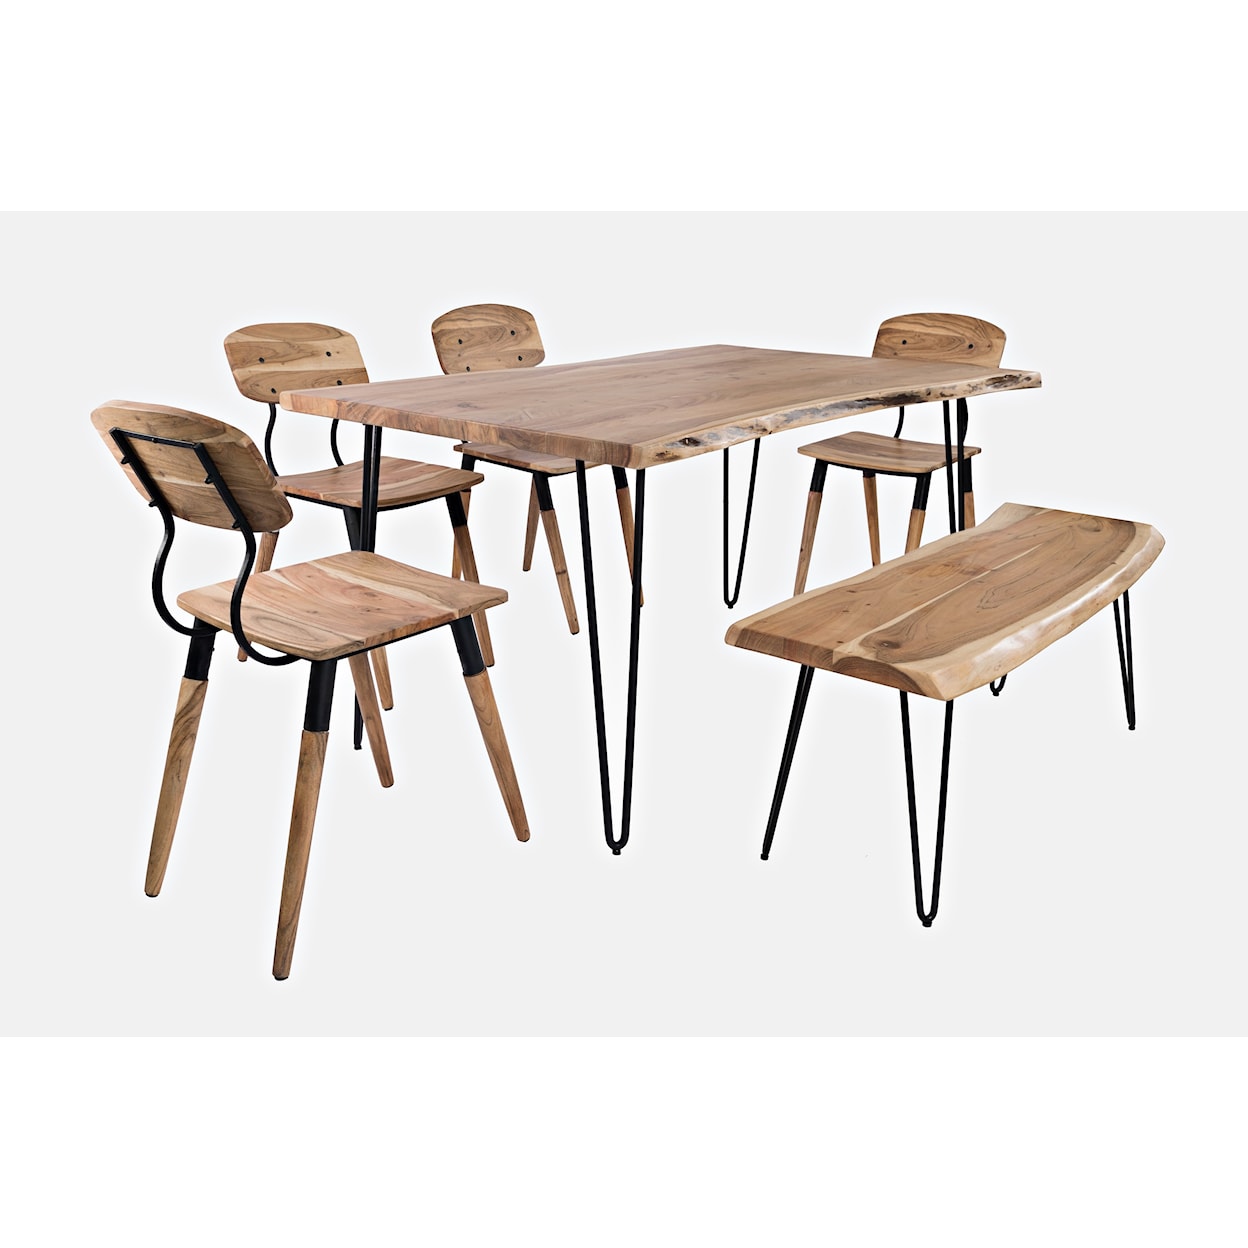 Jofran Arborist 60" Dining Table with 4 Chairs and Bench